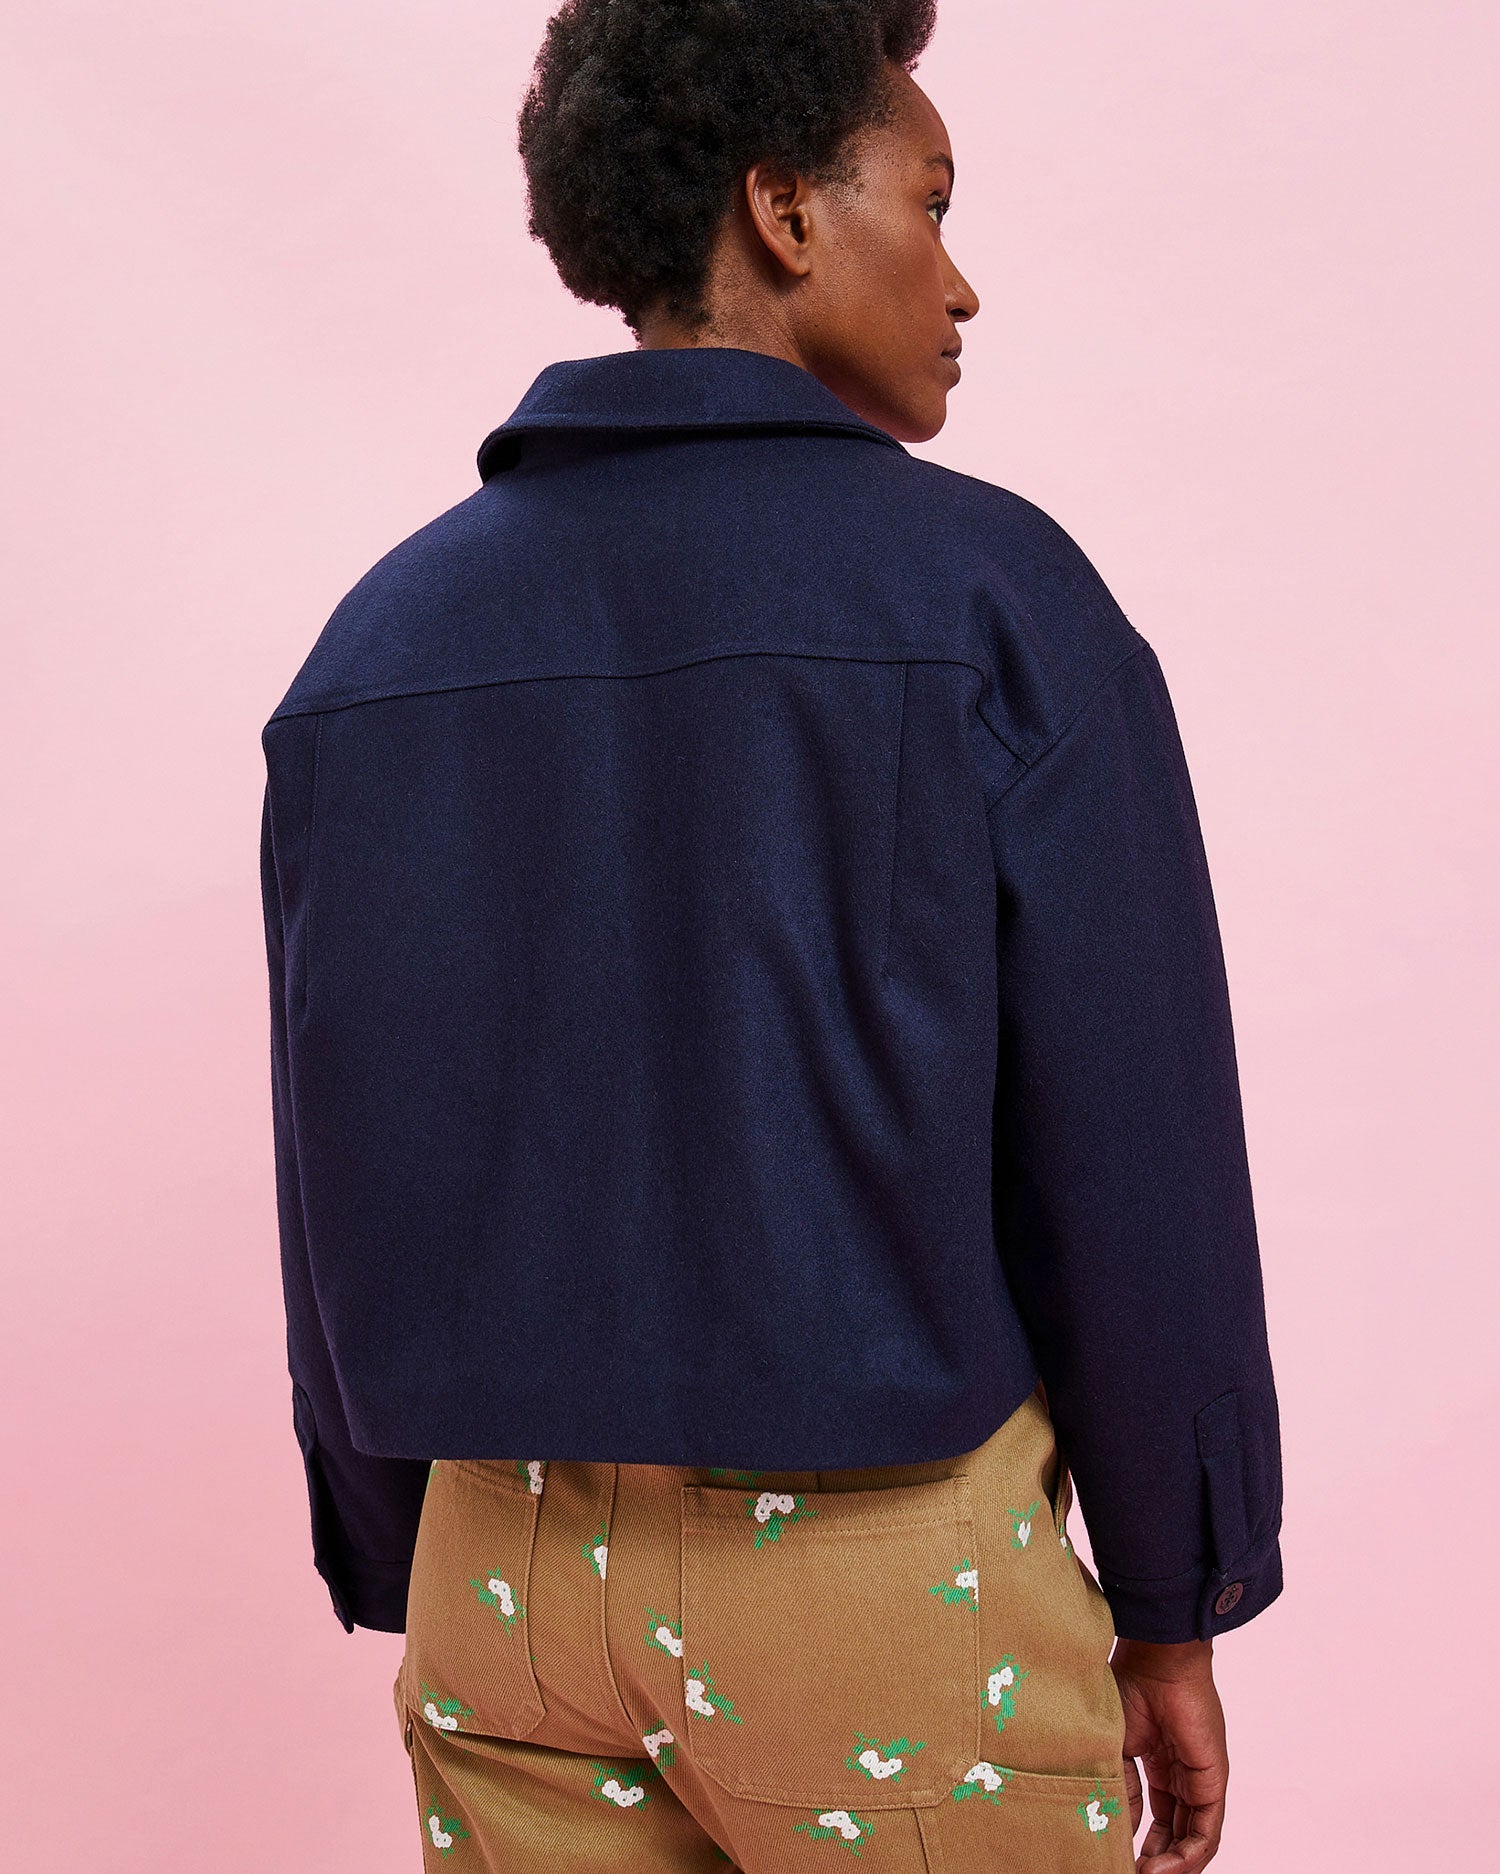 back view of the model wearing the Navy Wool Coat